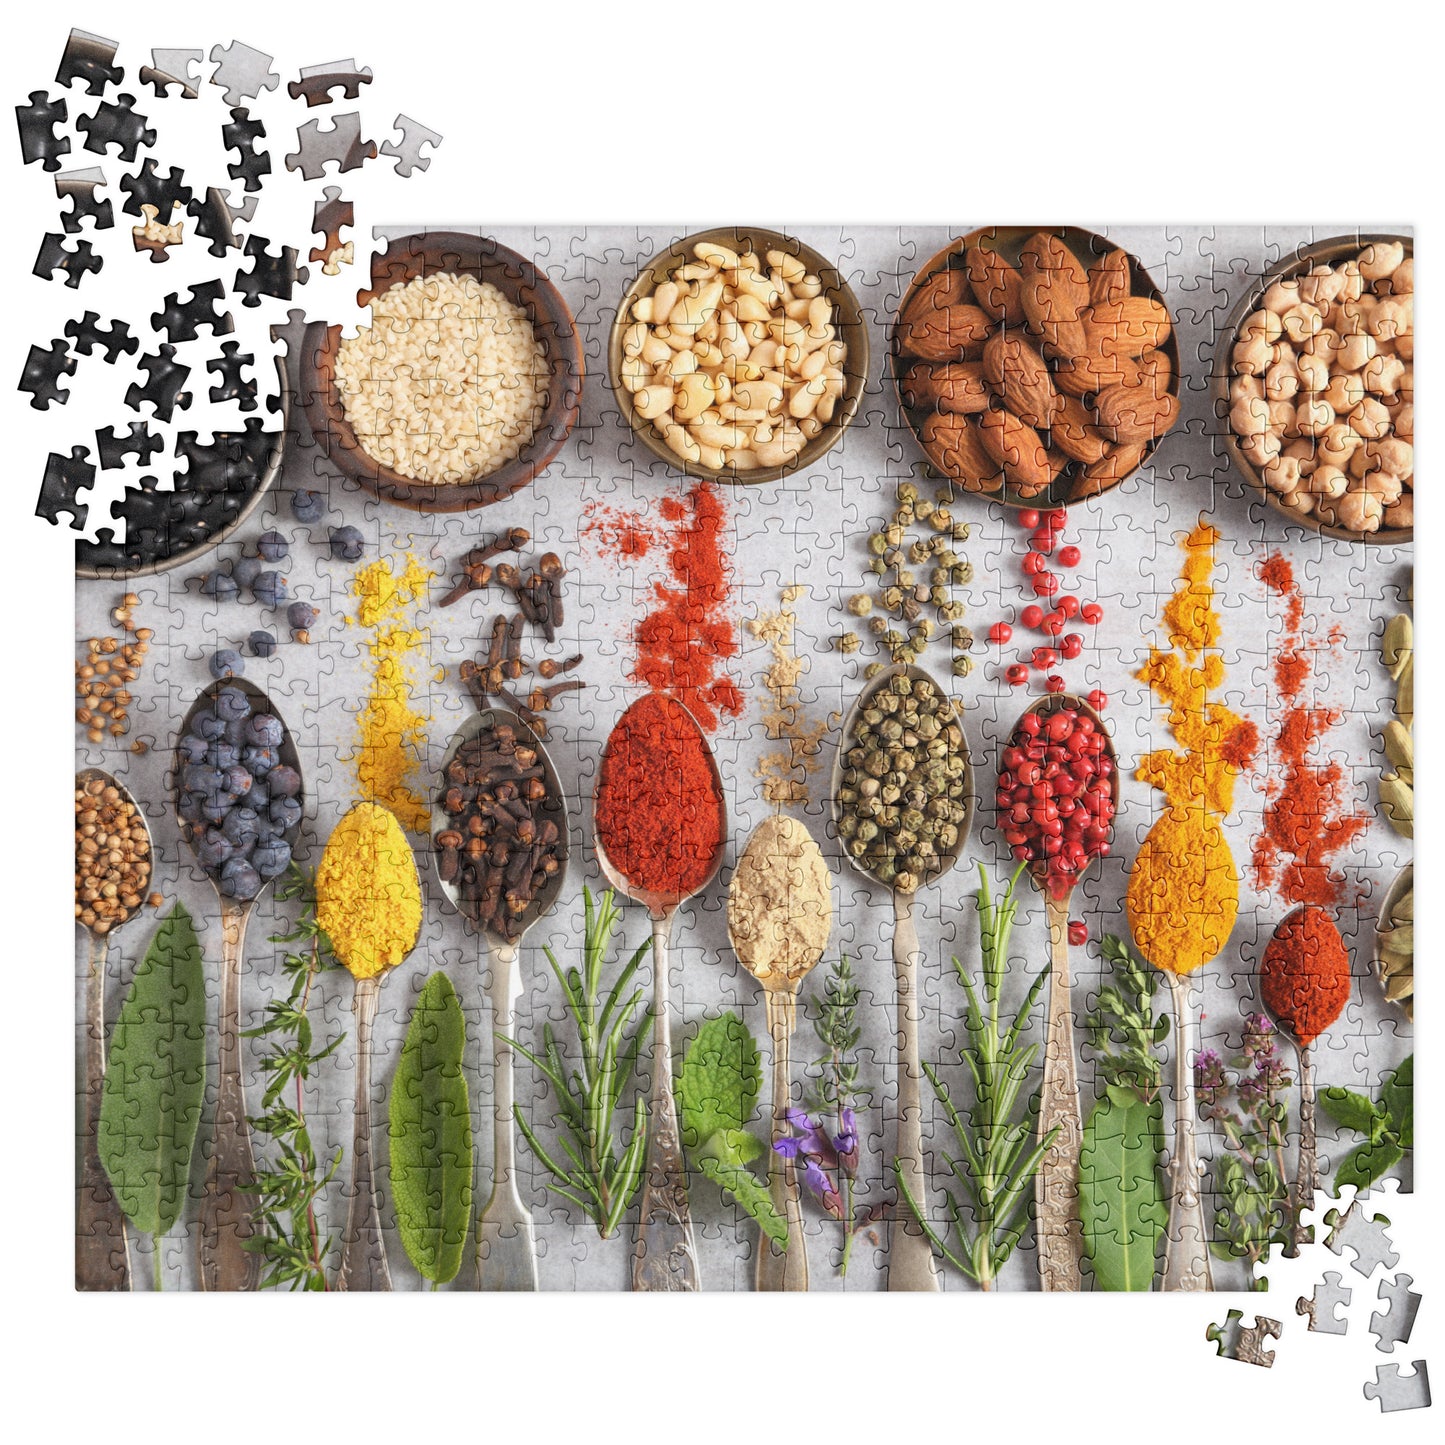 Herb Garden Jigsaw puzzle: Herbs, Spices, Nuts, Legumes